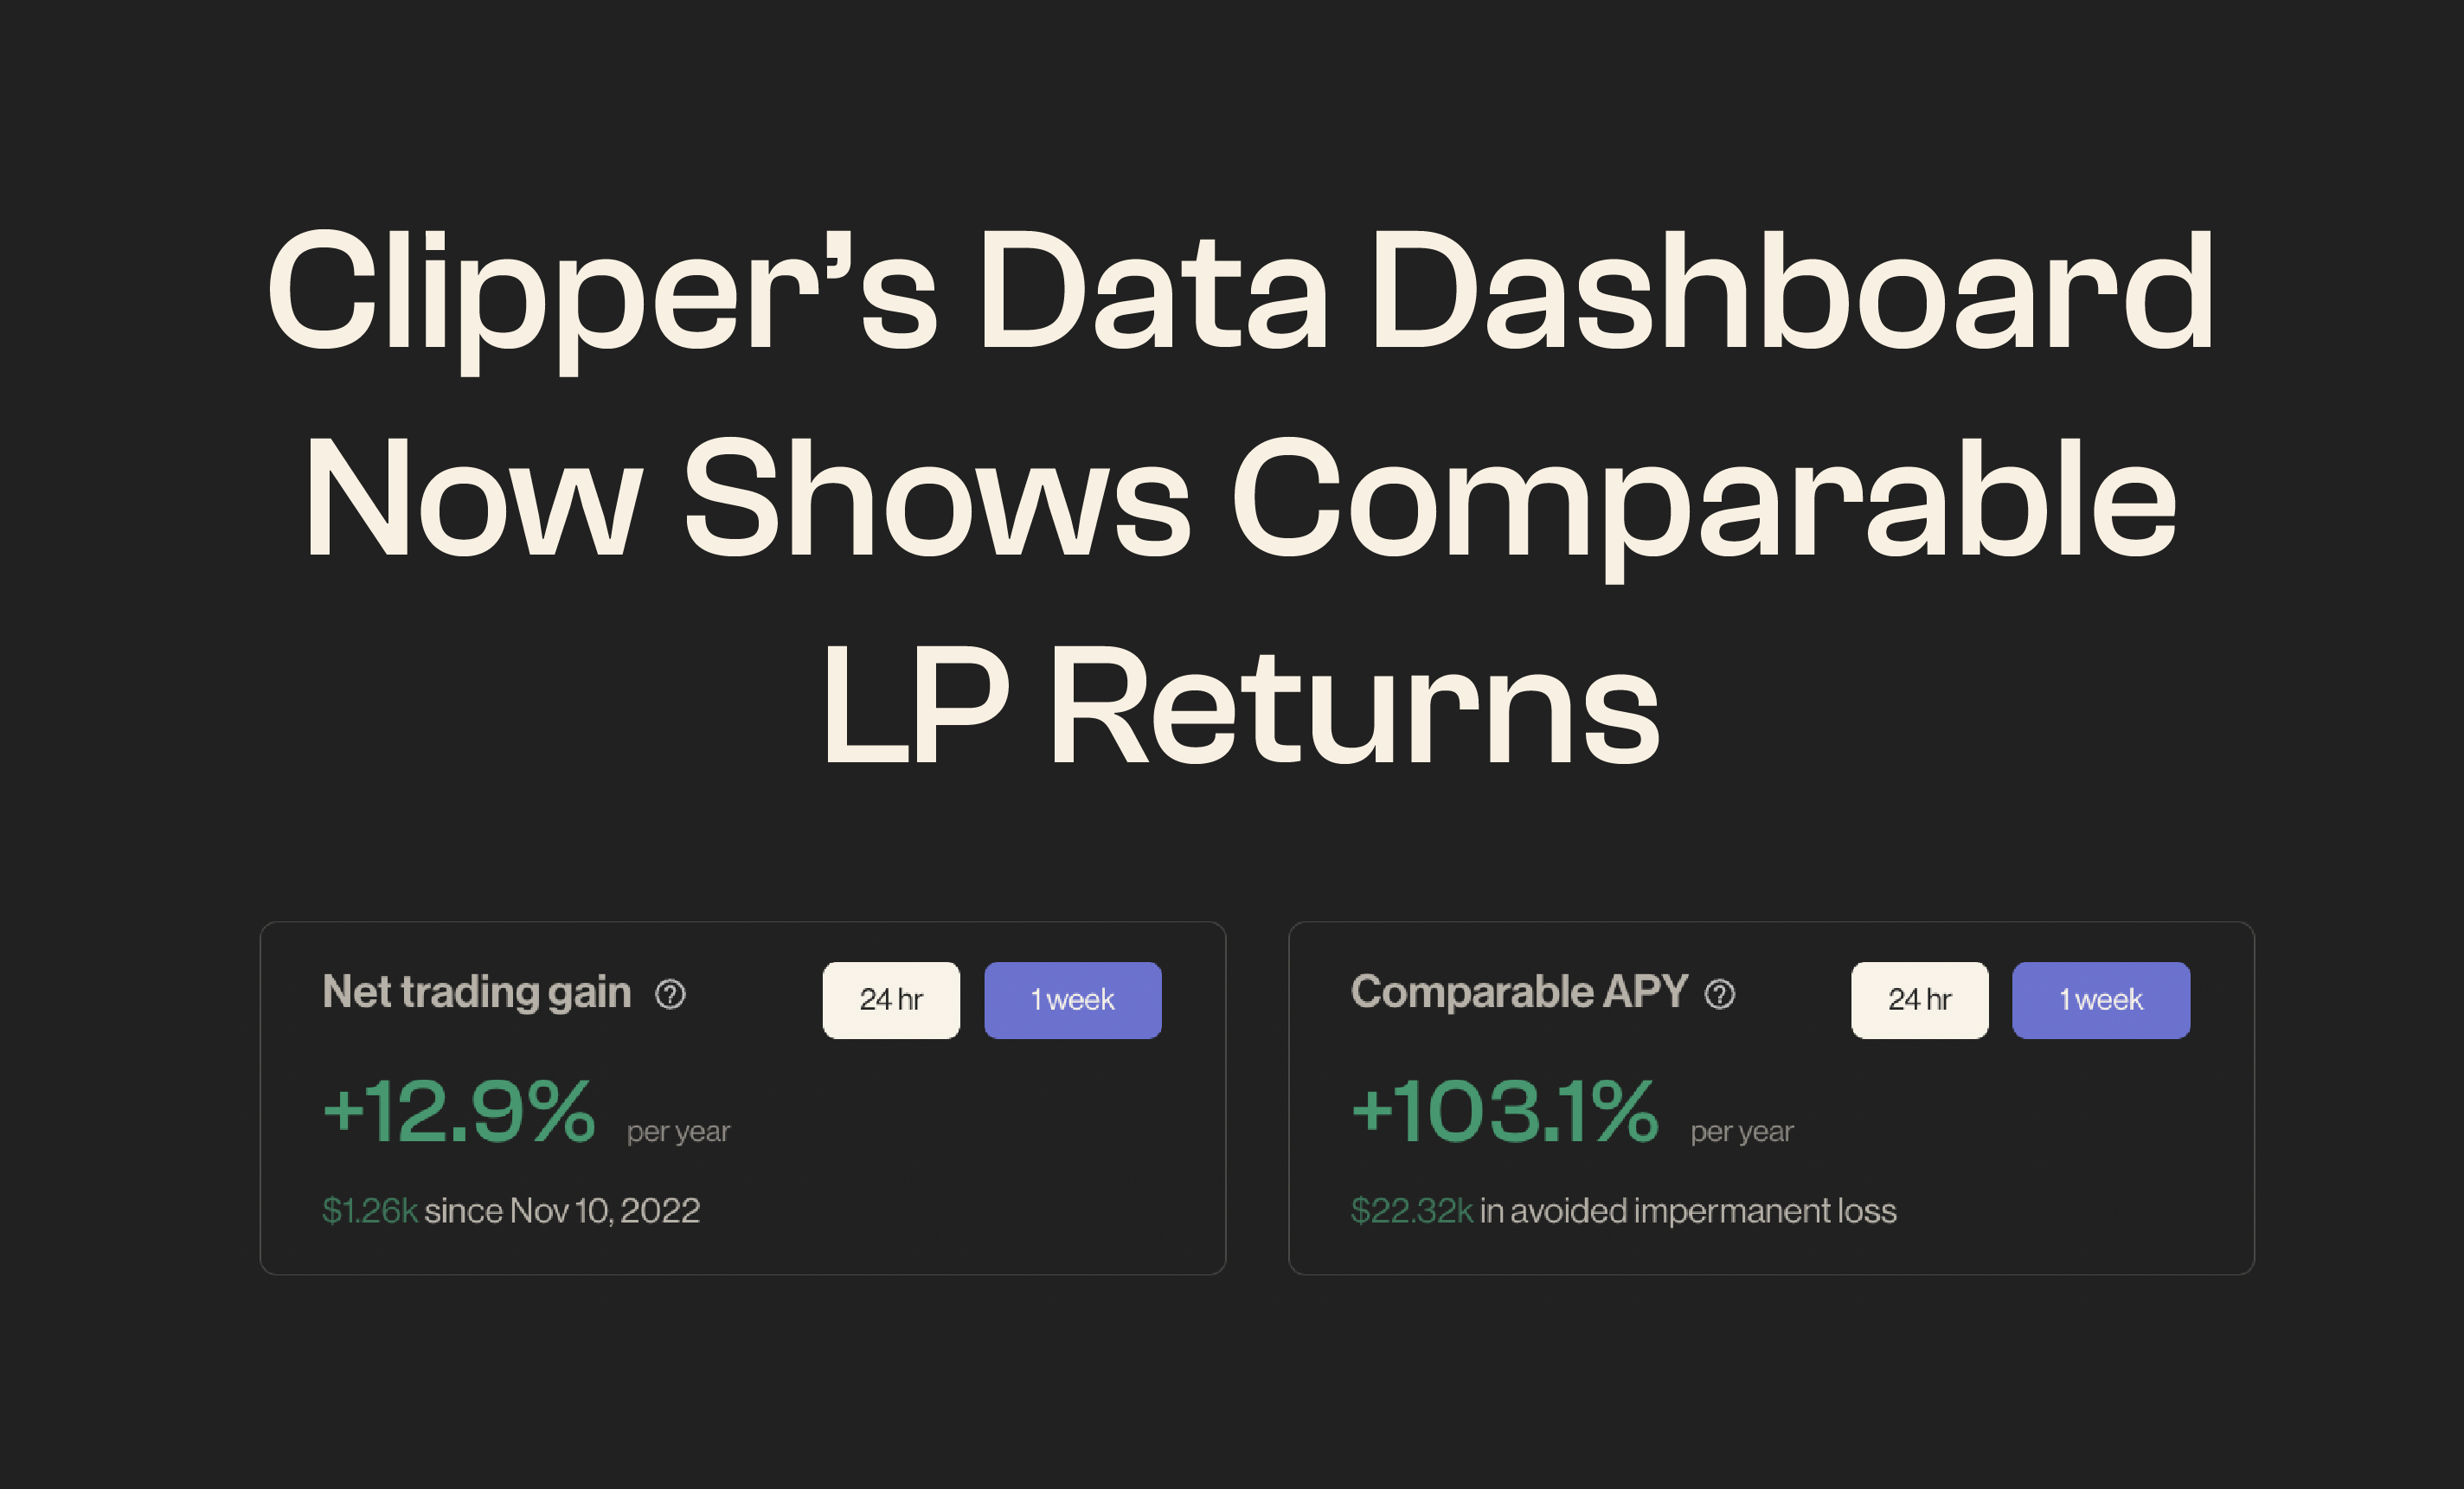 Clipper’s Data Dashboard Now Shows Comparable LP Returns!